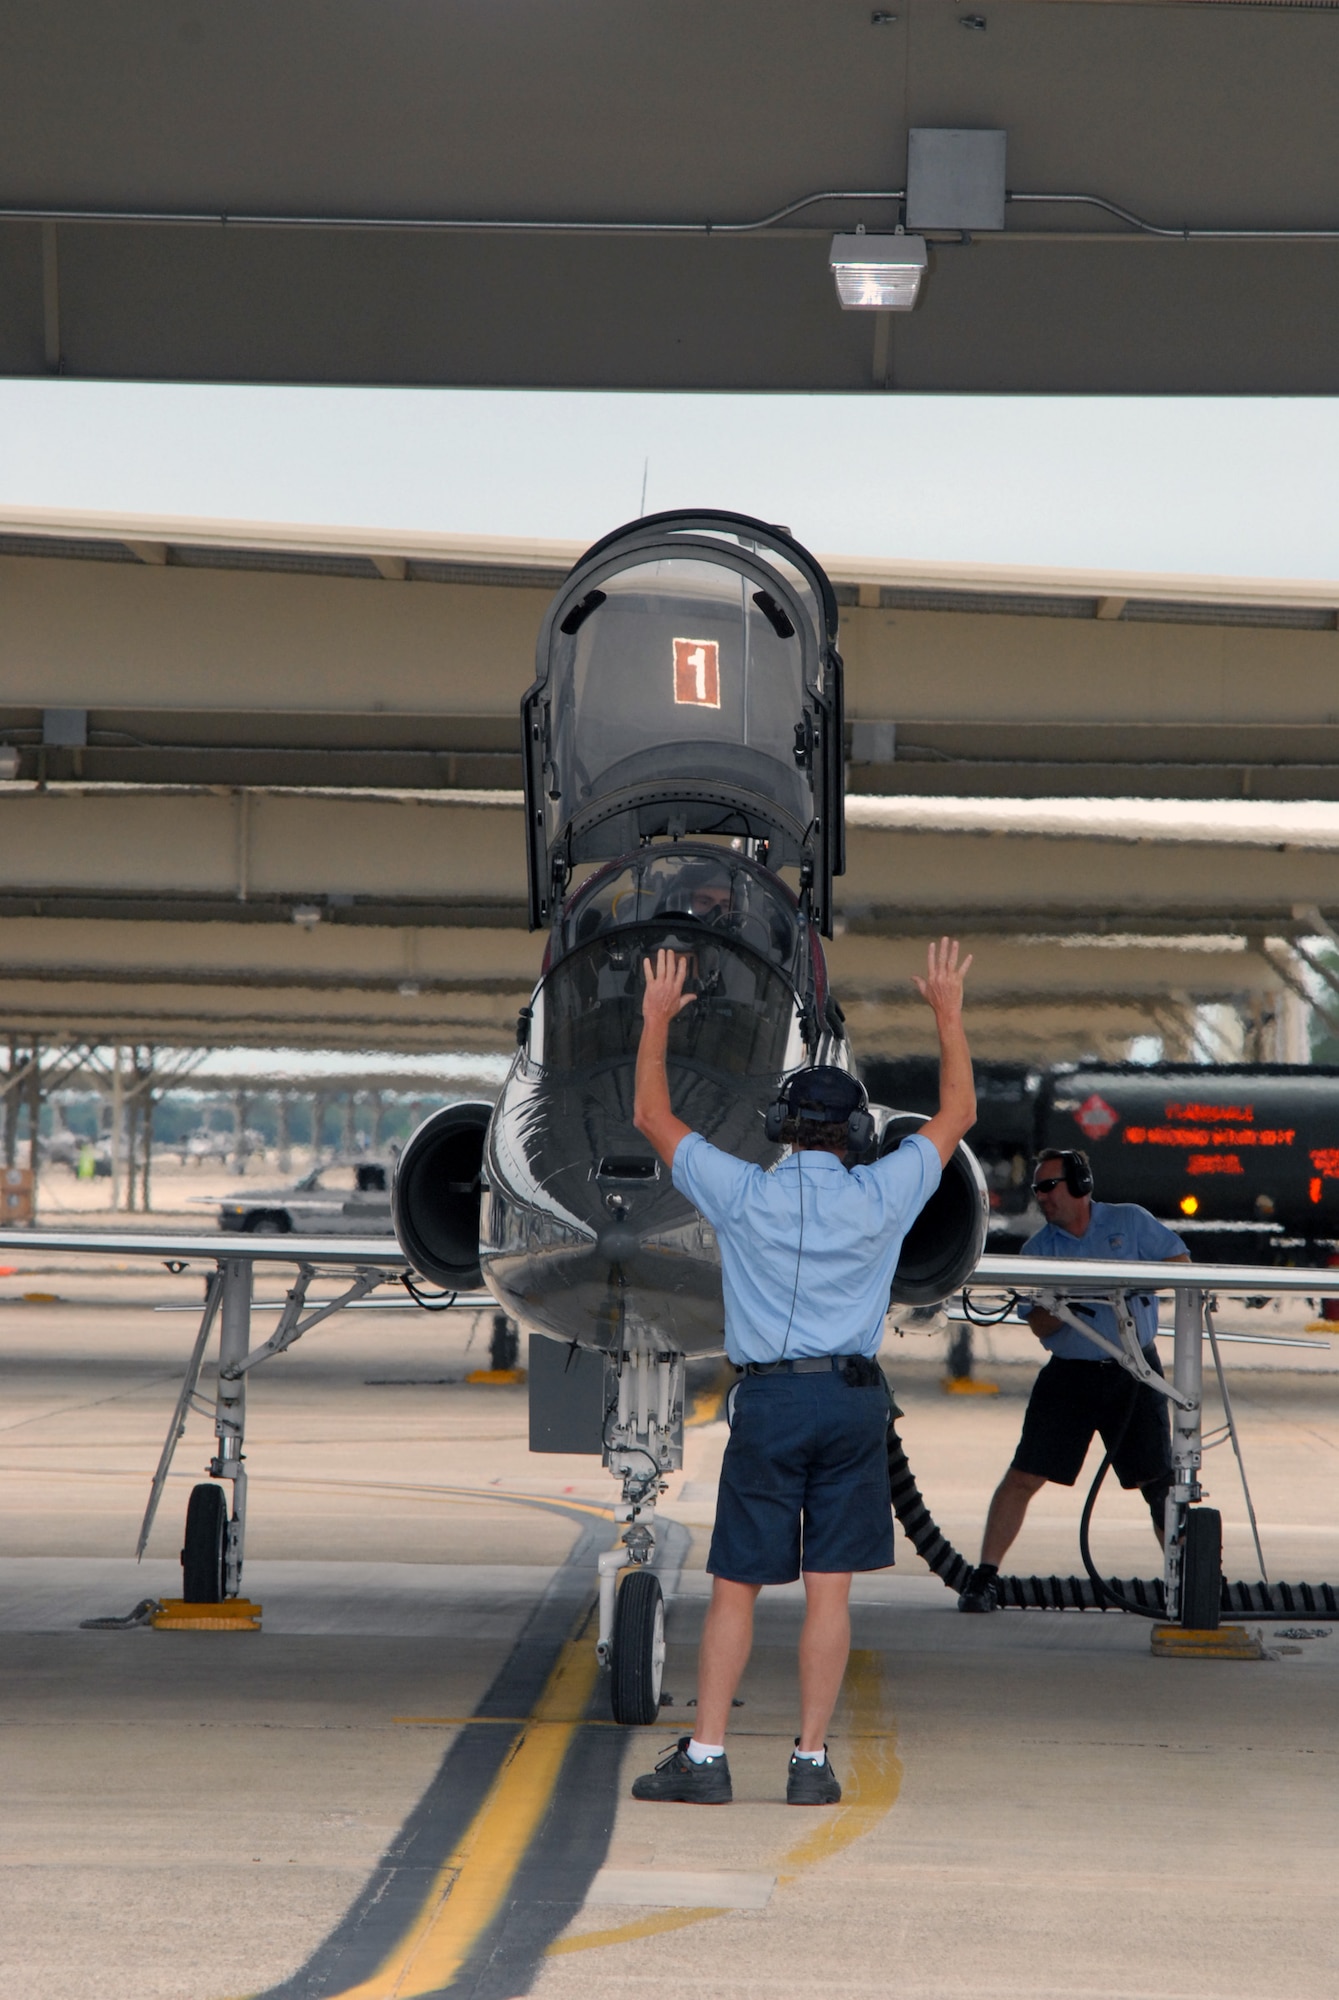 Bill Monk, a T-38 crewman from the 12th Maintenance Division, readies the pilot and aircraft prior to taxi and takeoff for a routine training mission here. (U.S. Air Force photo by Rich McFadden)